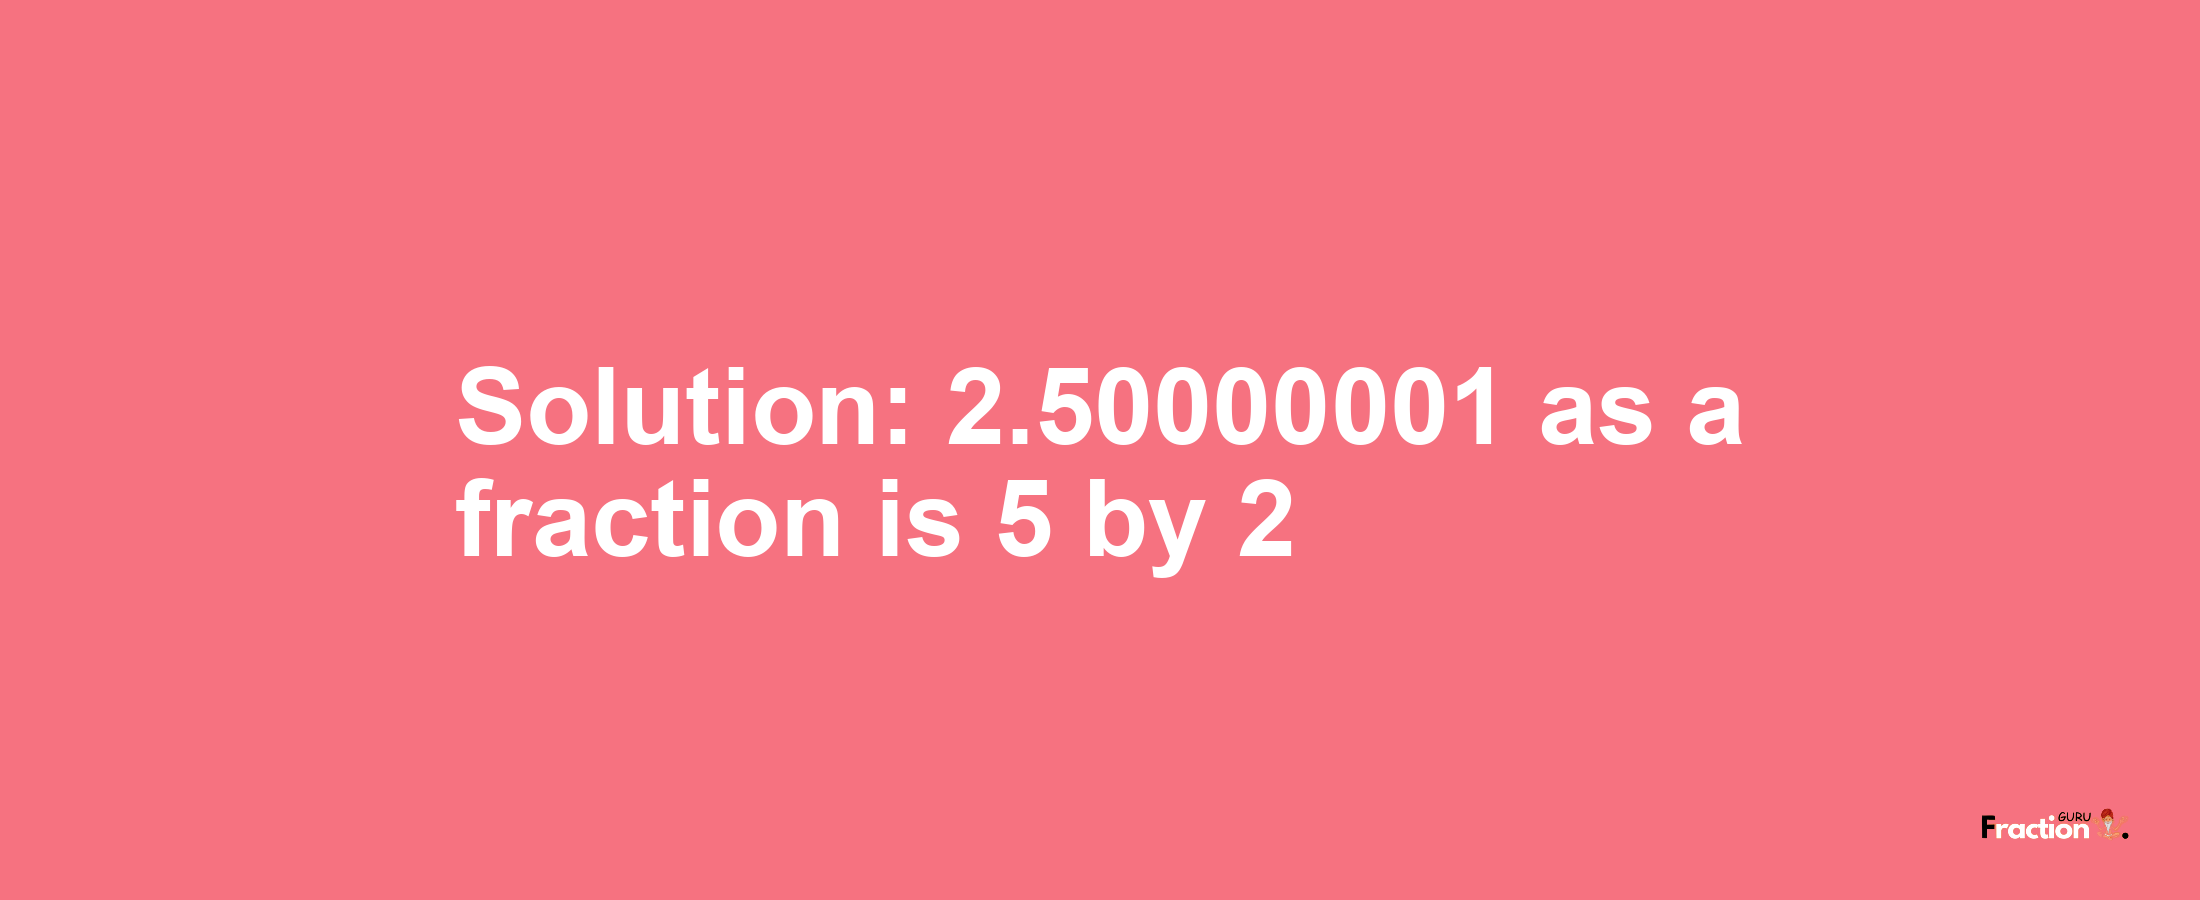 Solution:2.50000001 as a fraction is 5/2